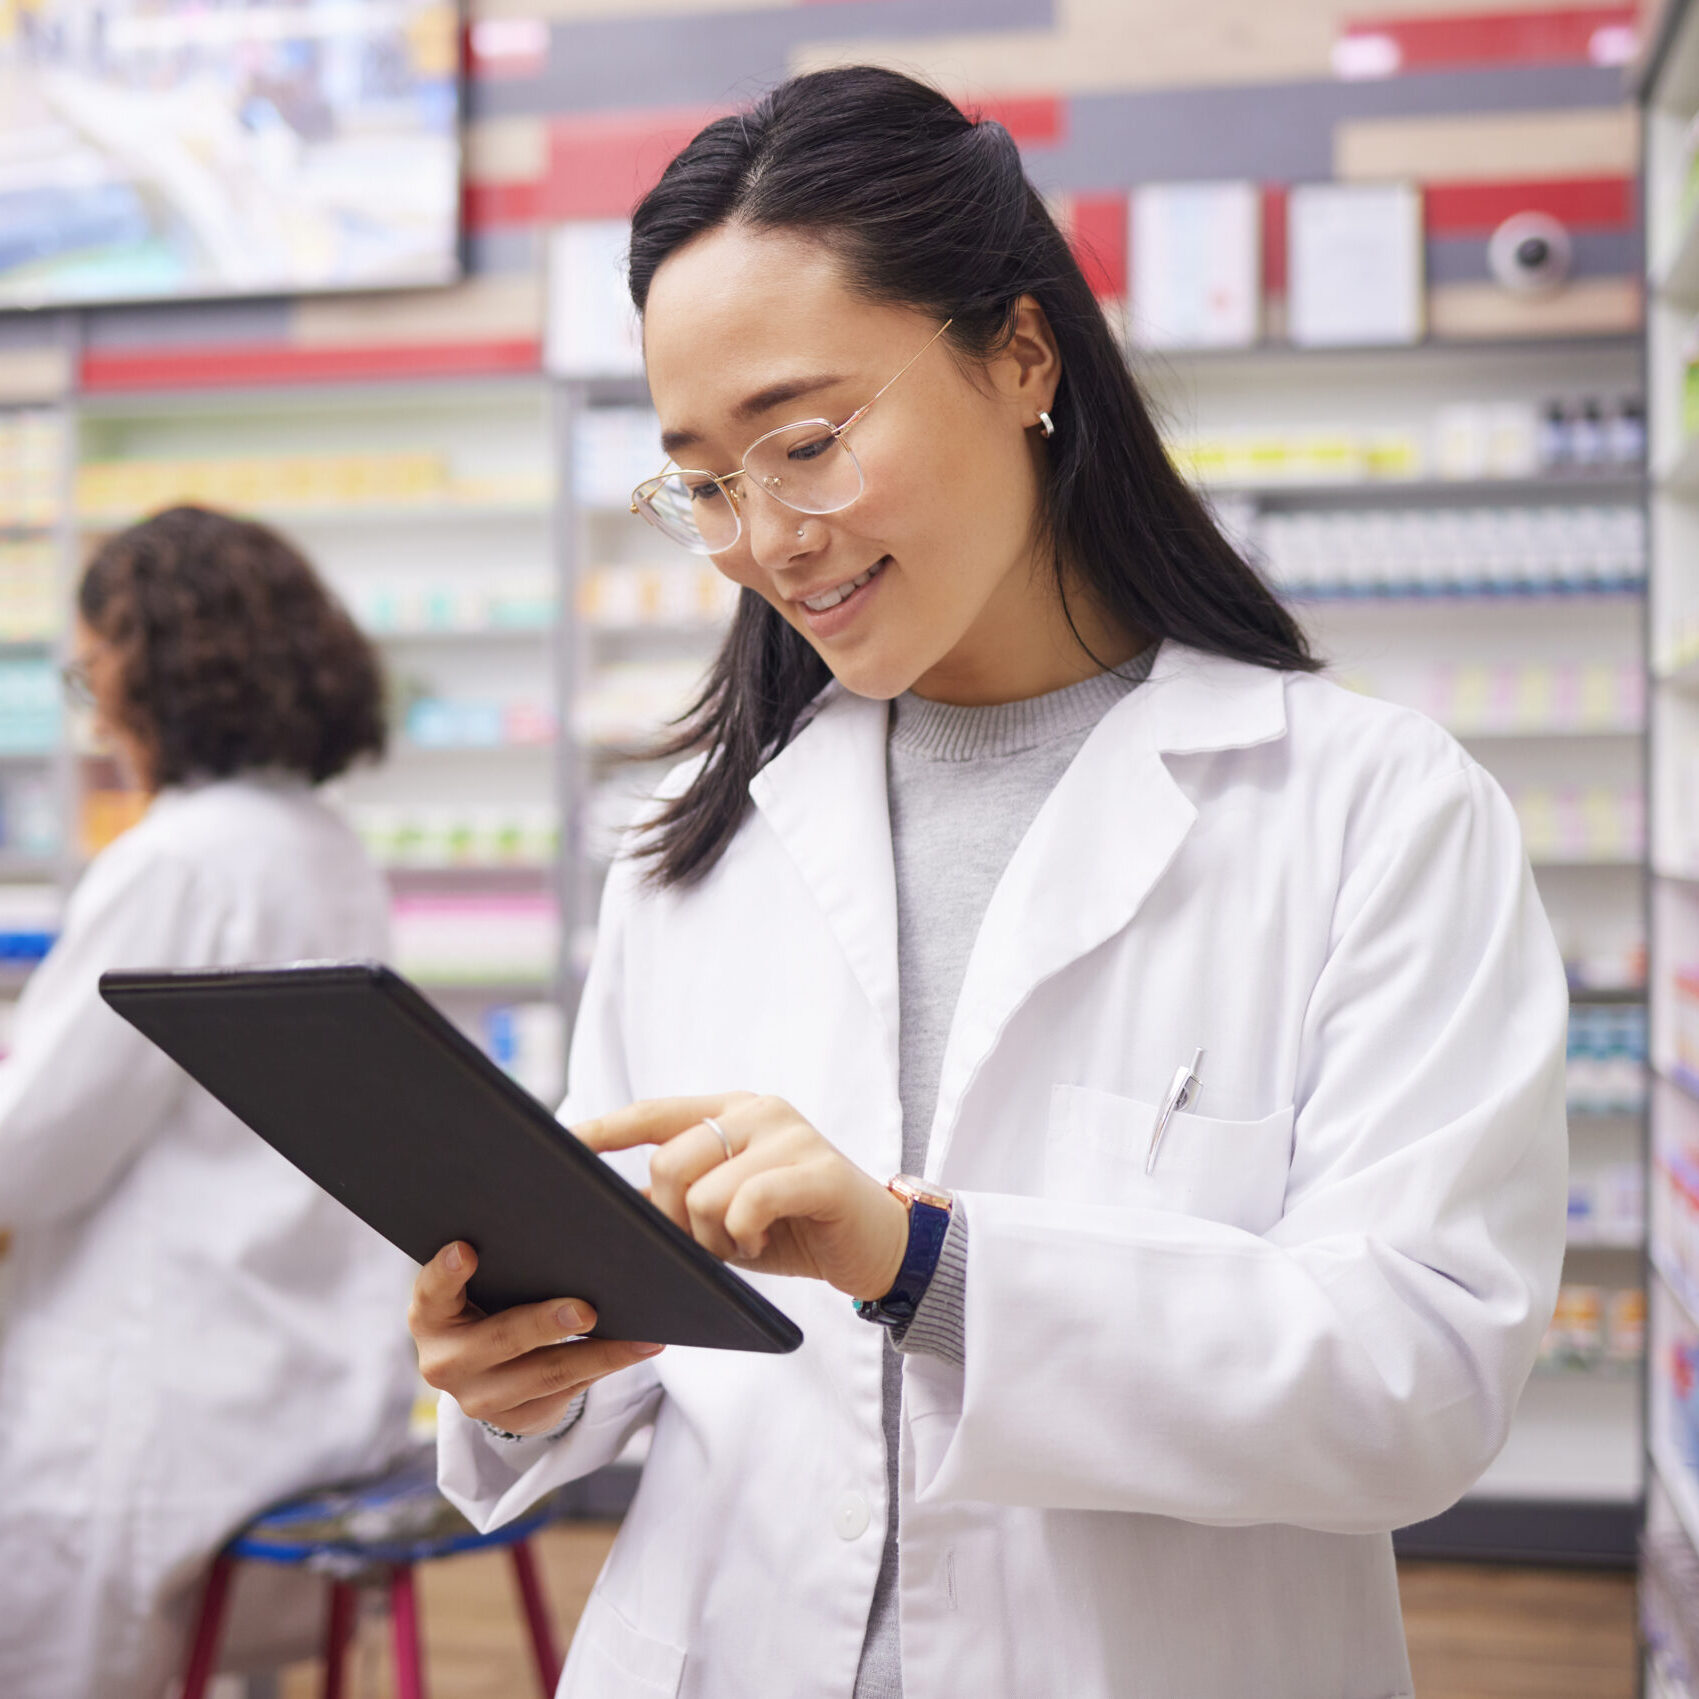 A pharmacist in a pharmacy checking prescriptions on a tablet